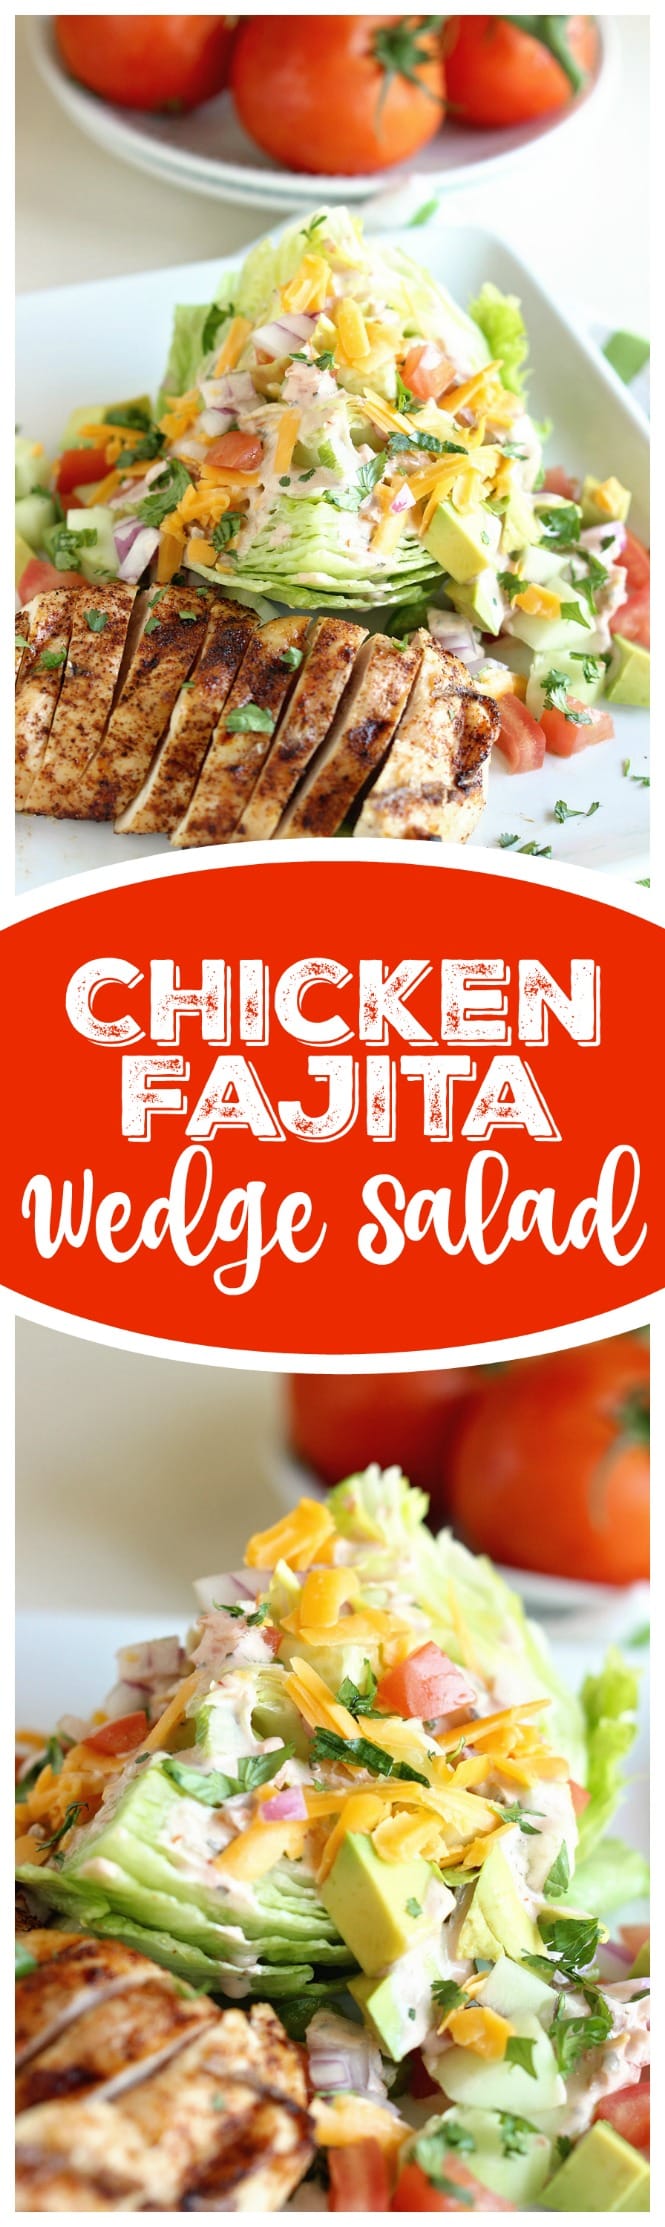 This Chicken Fajita Wedge Salad is a perfect way to enjoy fajitas in a light, healthy, and low-carb way!